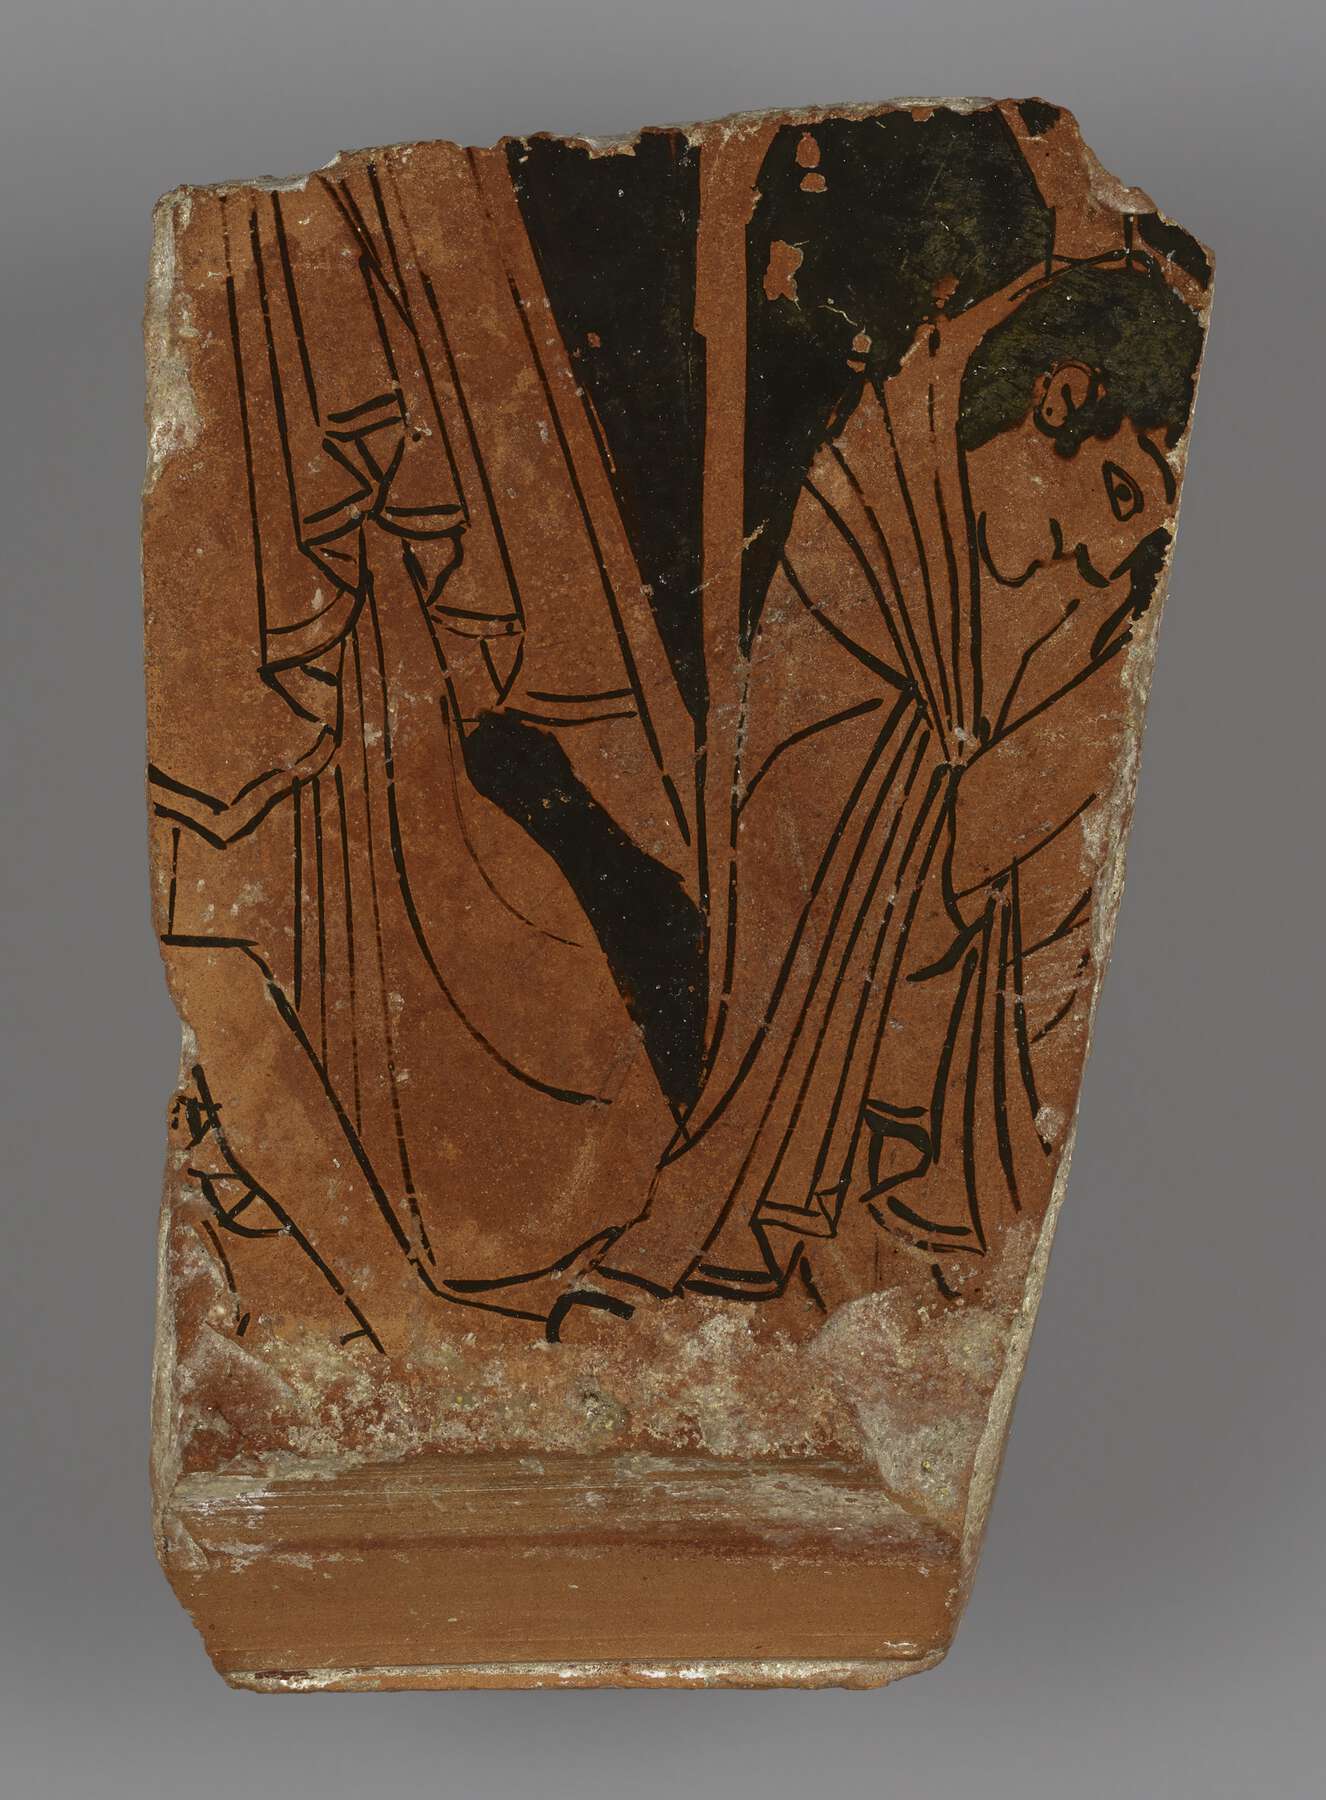 Pottery fragment showing some of the clothing of two people